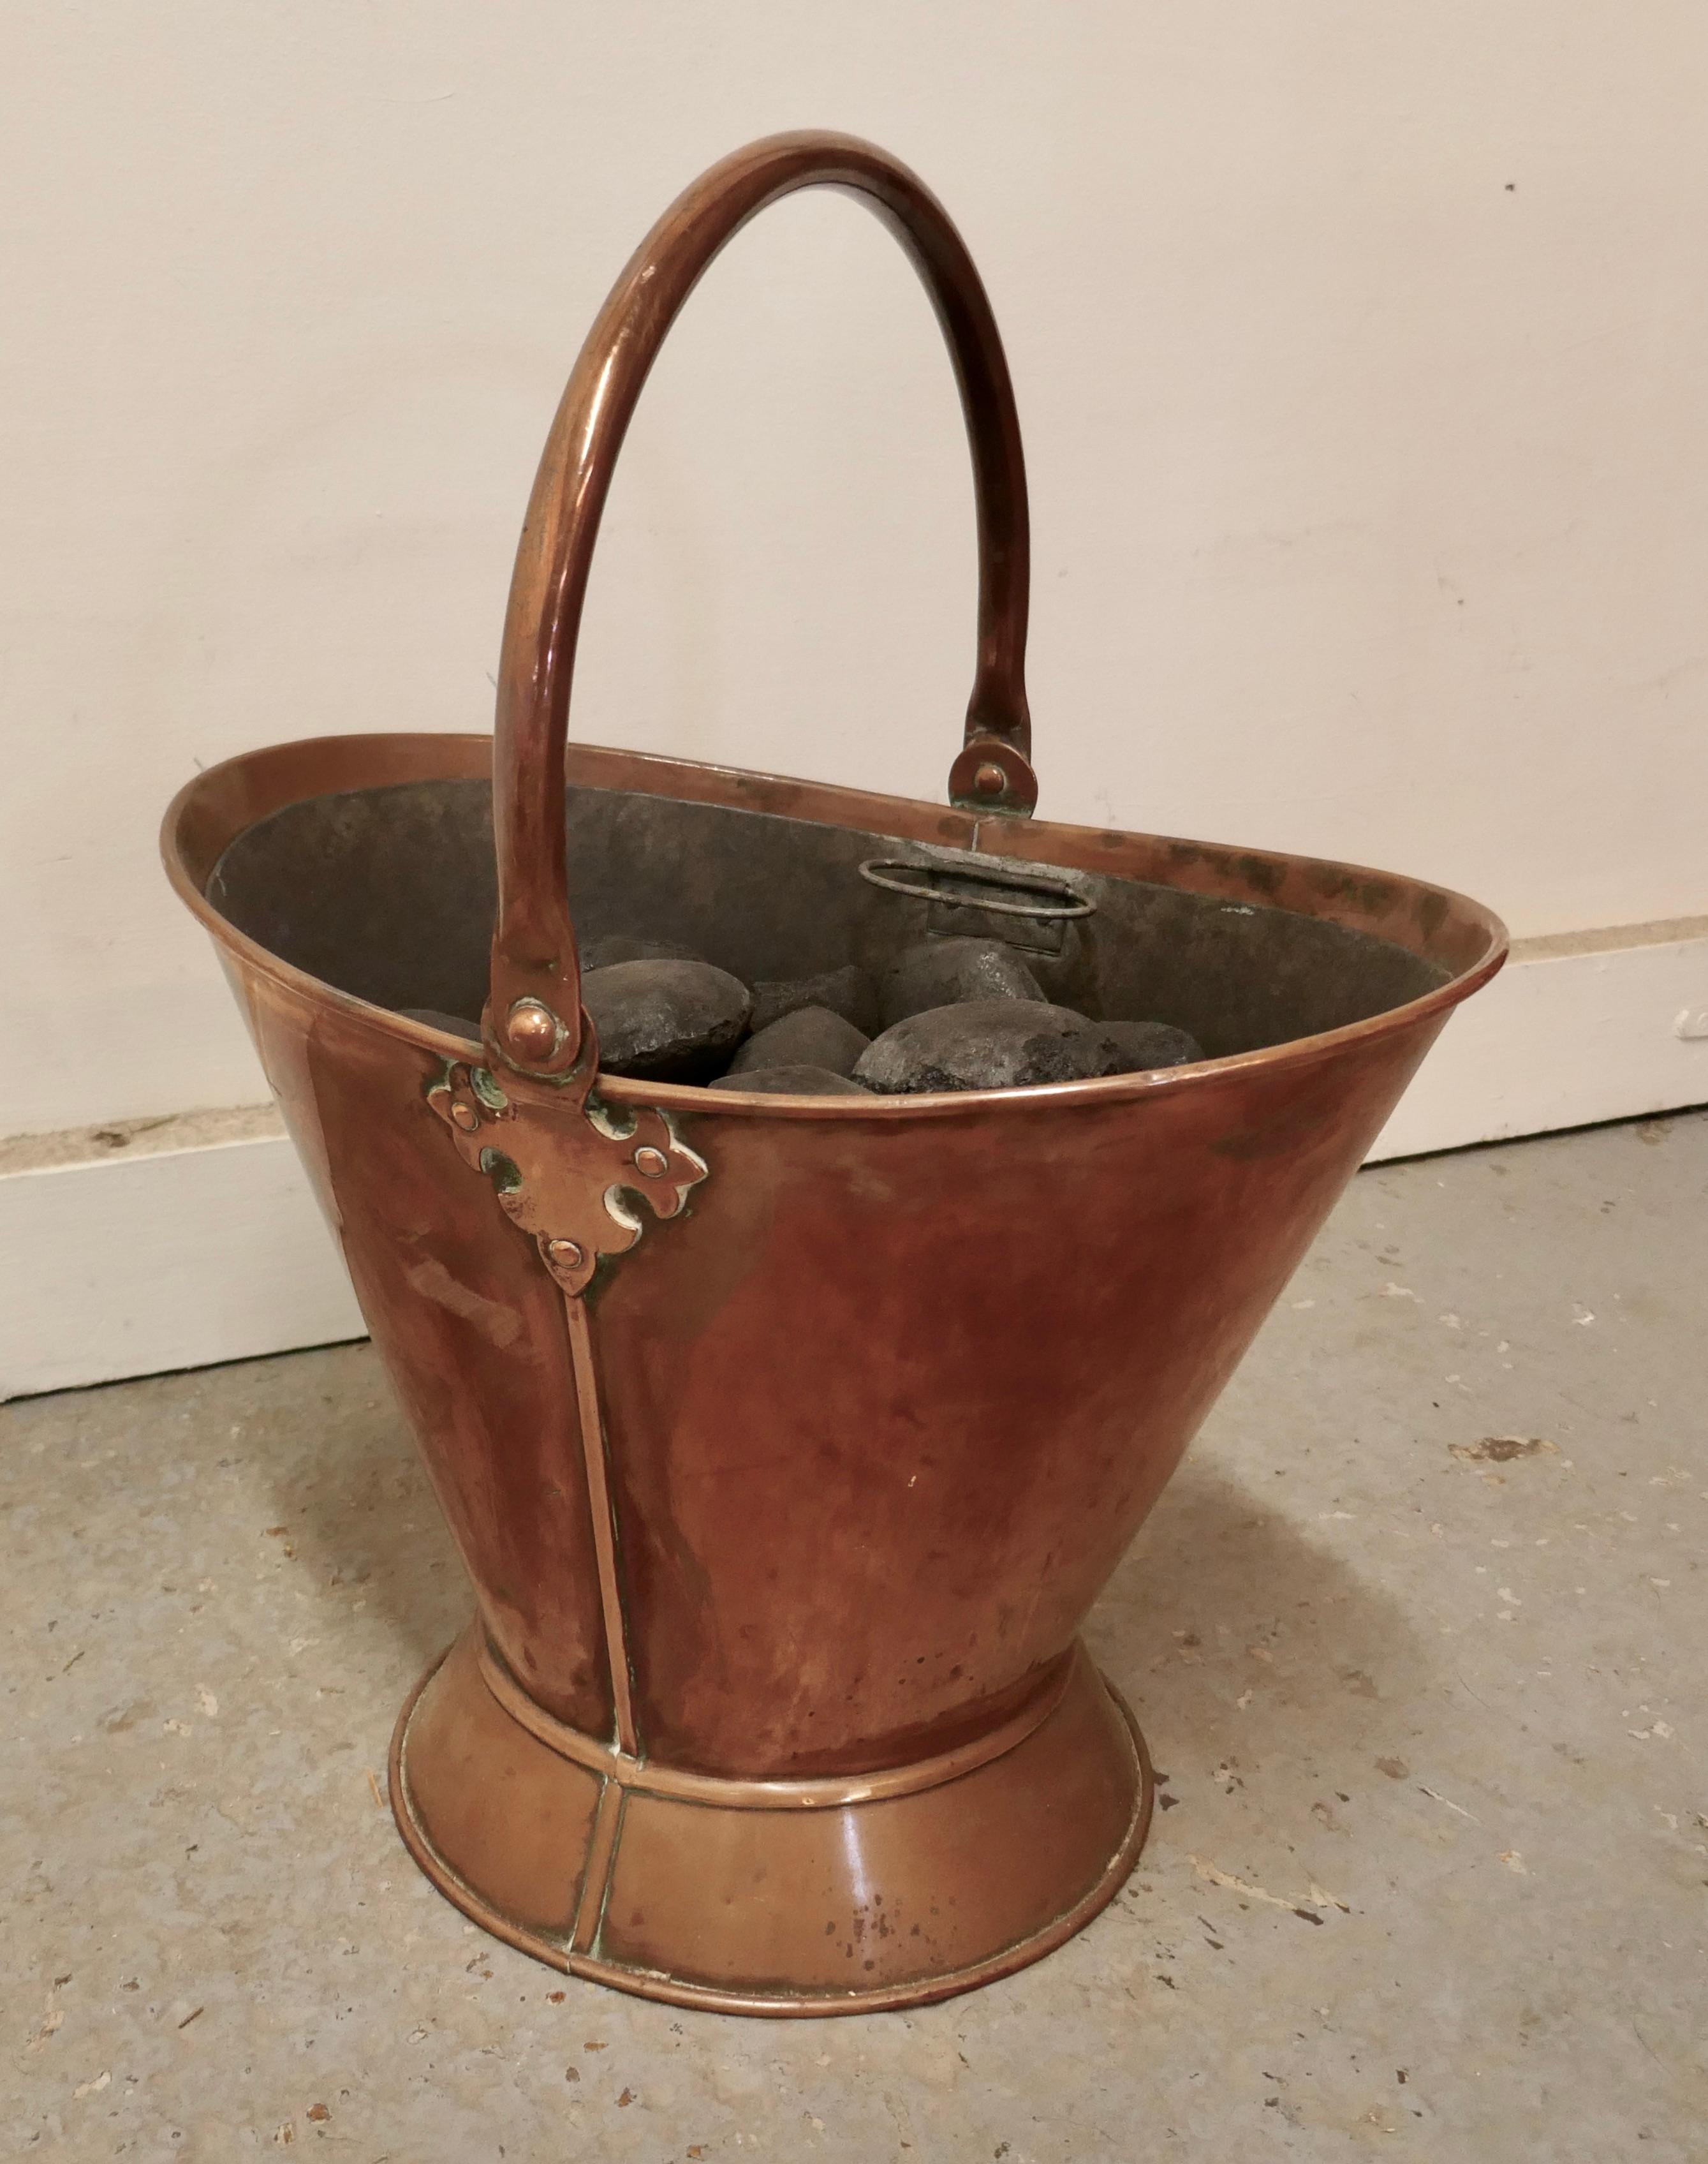 An Art Nouveau copper helmet coal scuttle with liner

This is a very attractive bucket is has an open Oval shape with upward sweeping sides, it has a swing handle and a 2 handled lift out liner 
The Scuttle is in very good used condition, and is